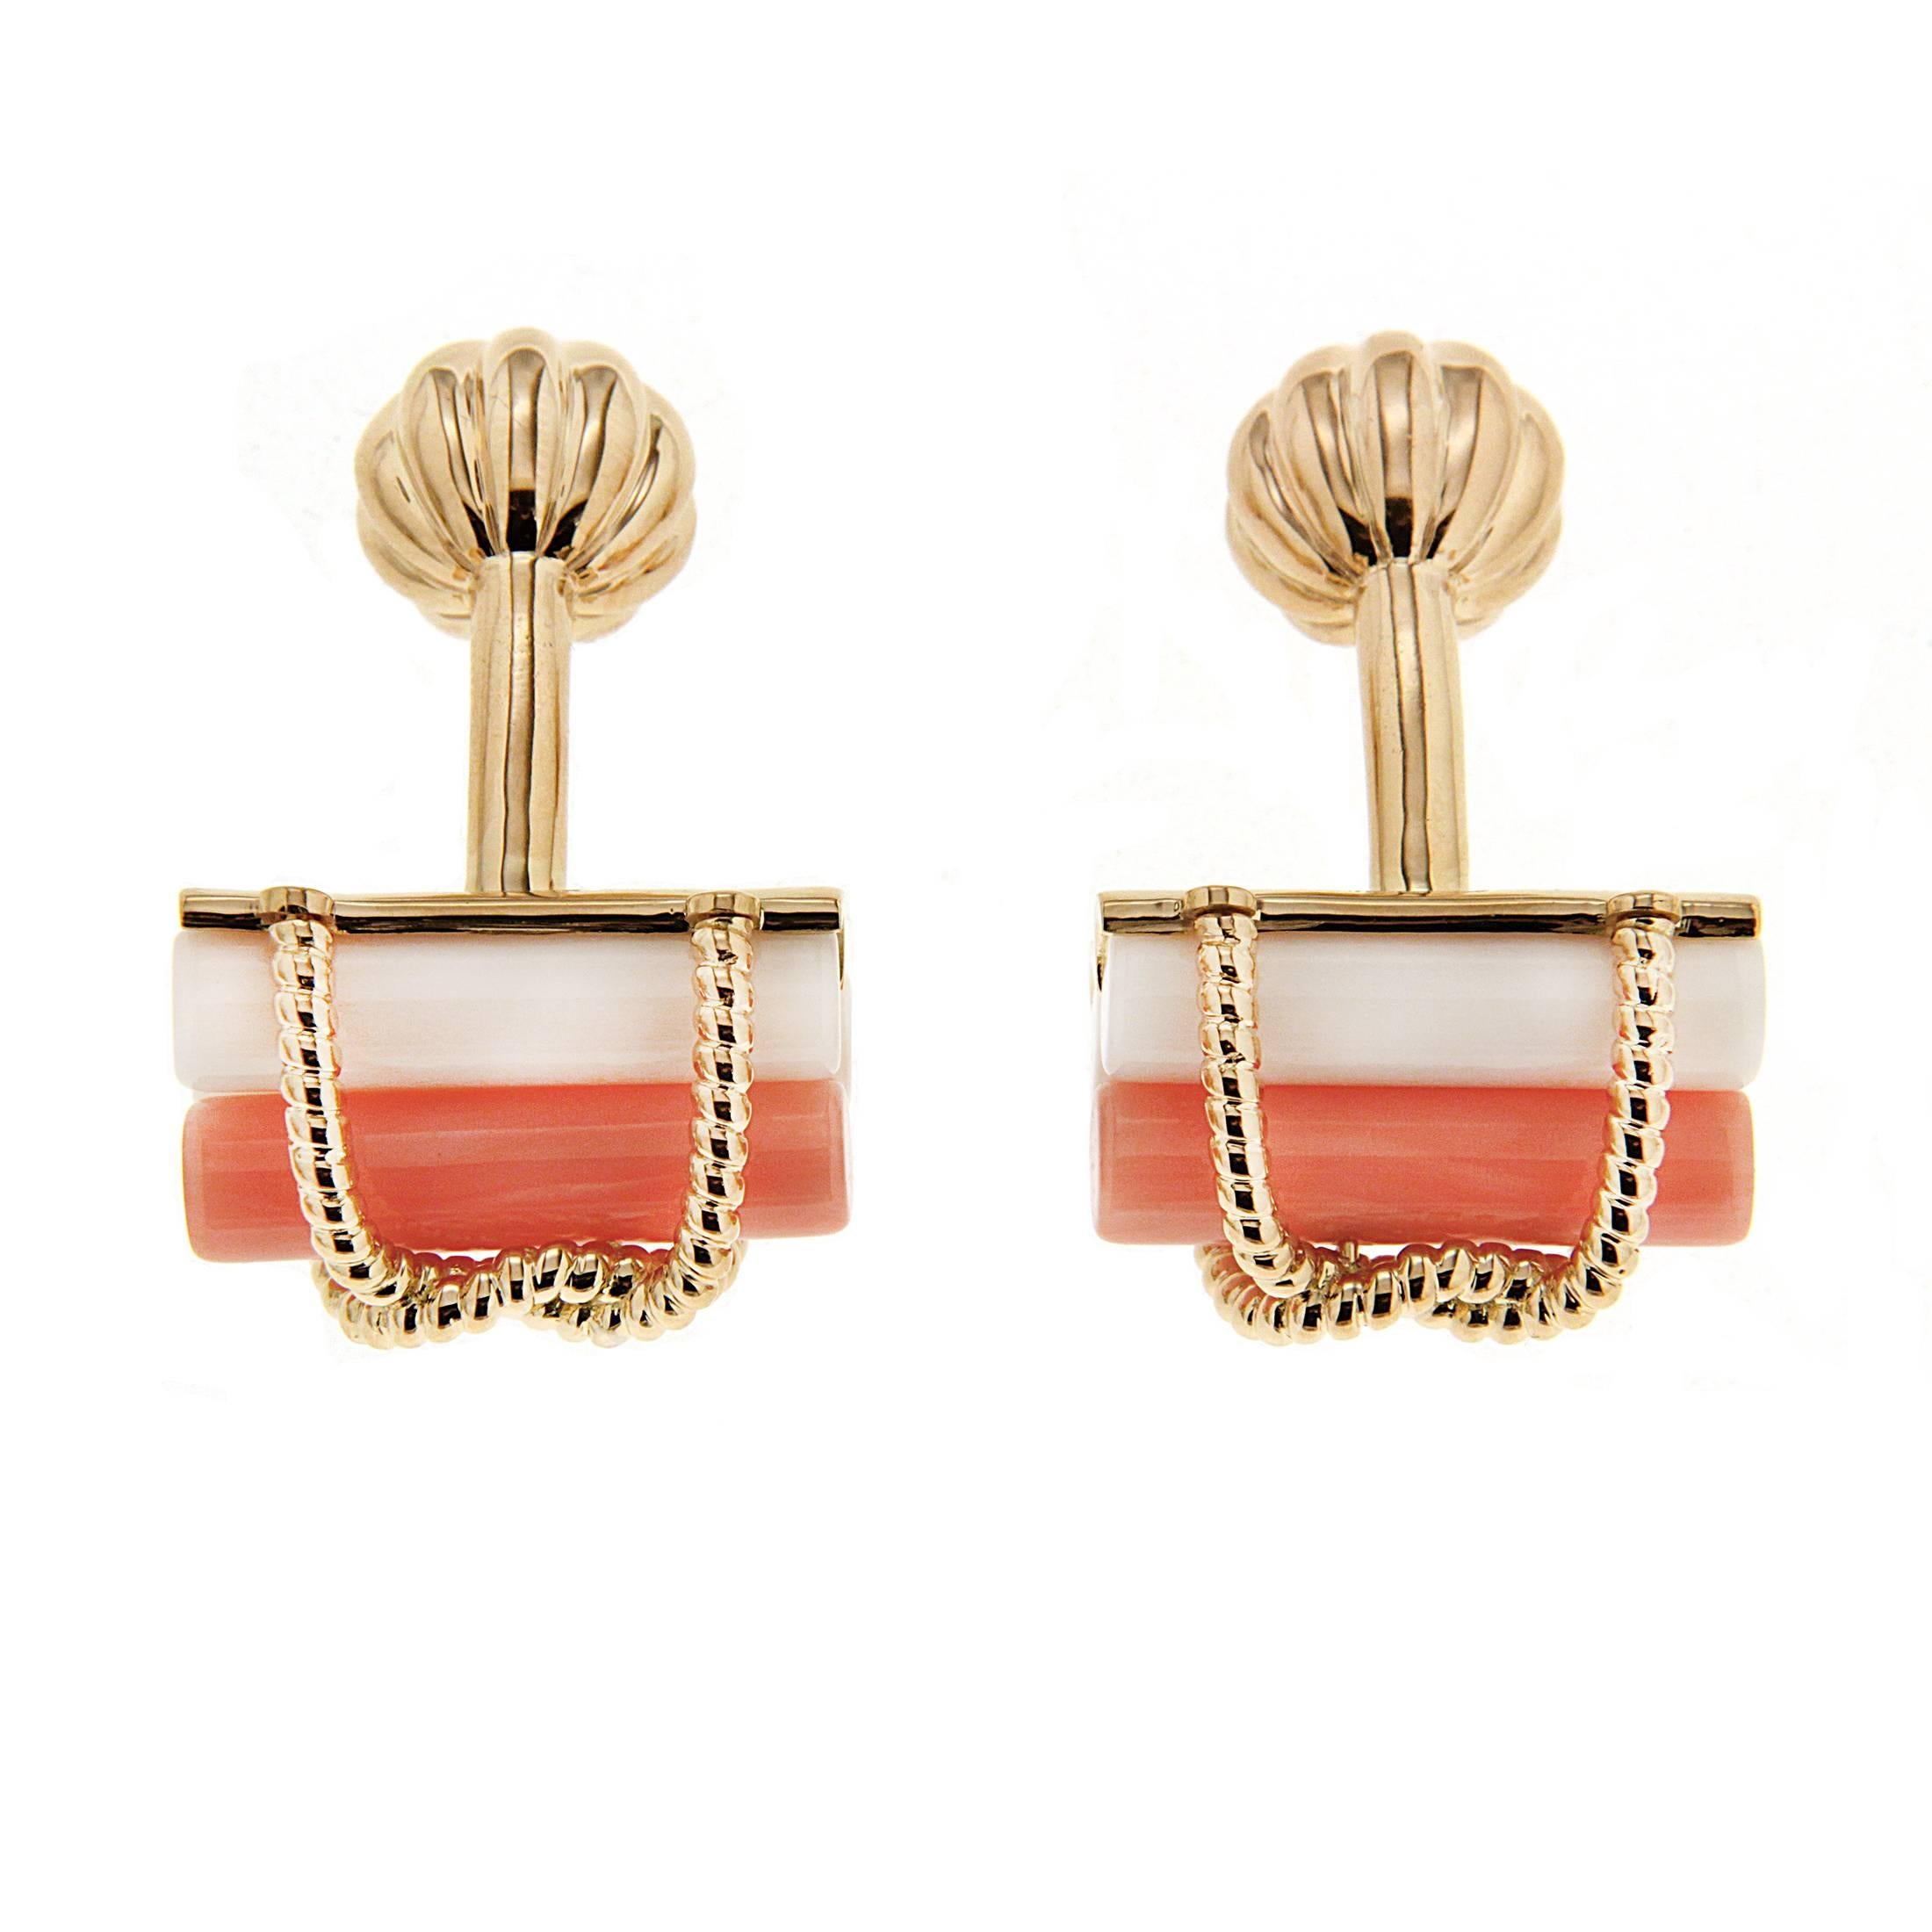 Coral and gold combine for elegant cufflinks. Tubes of the gem are the base of the motif, while intertwined 18k yellow gold braids loop over the top and bottom. The total weight of the coral is 9.25 carats. A bar and ornate ball toggle secure the